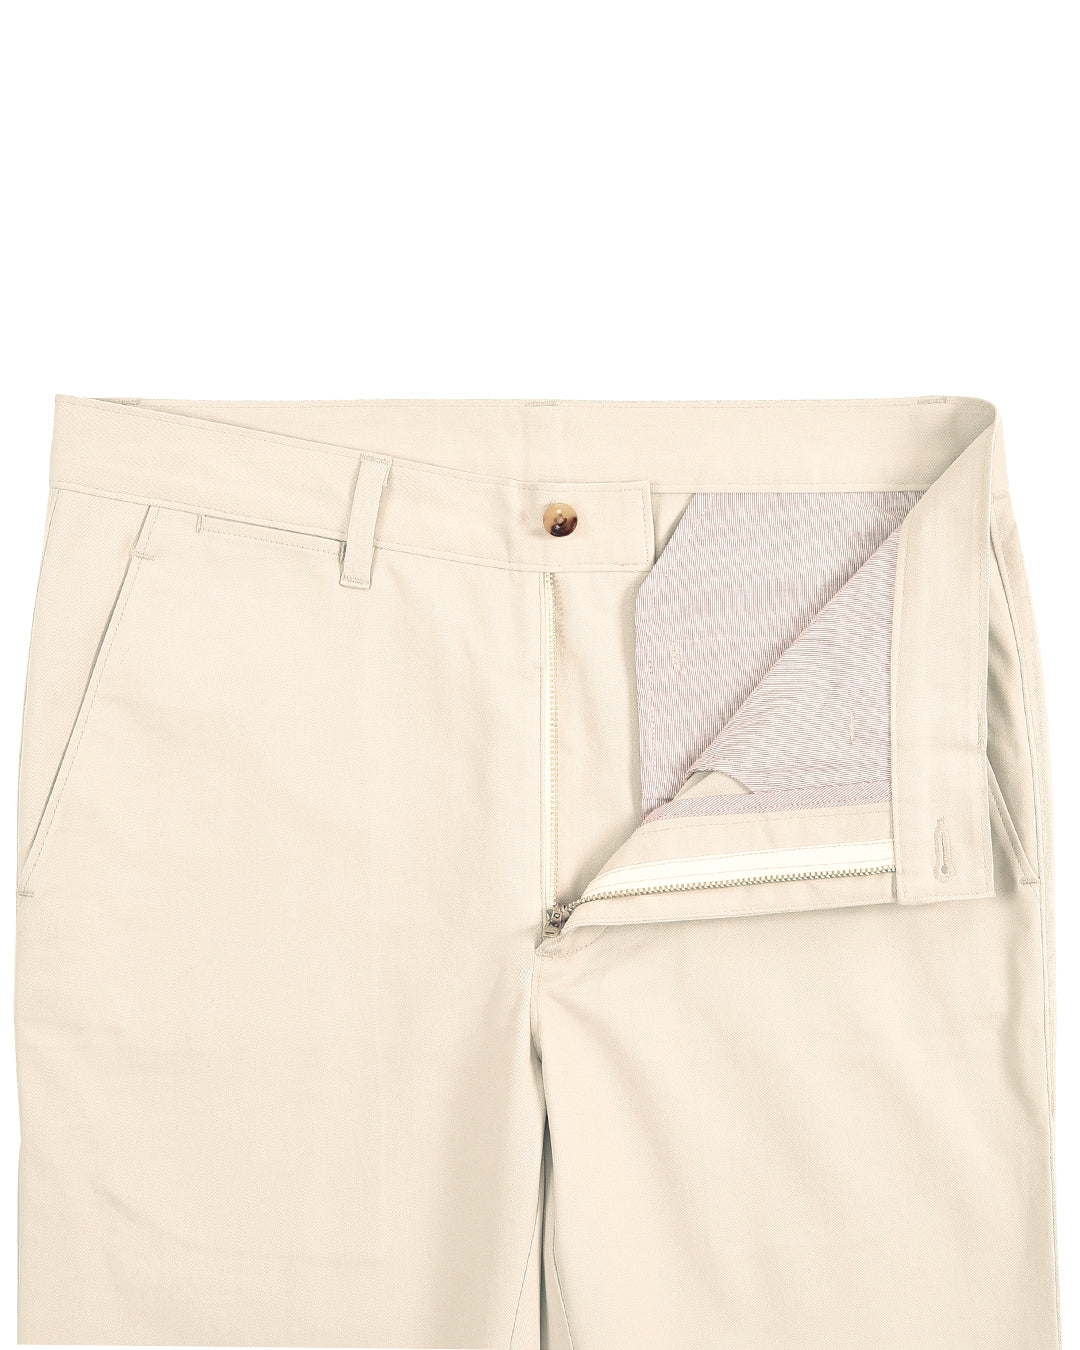 Open front view of custom Genoa Chino pants for men by Luxire in ivory cream